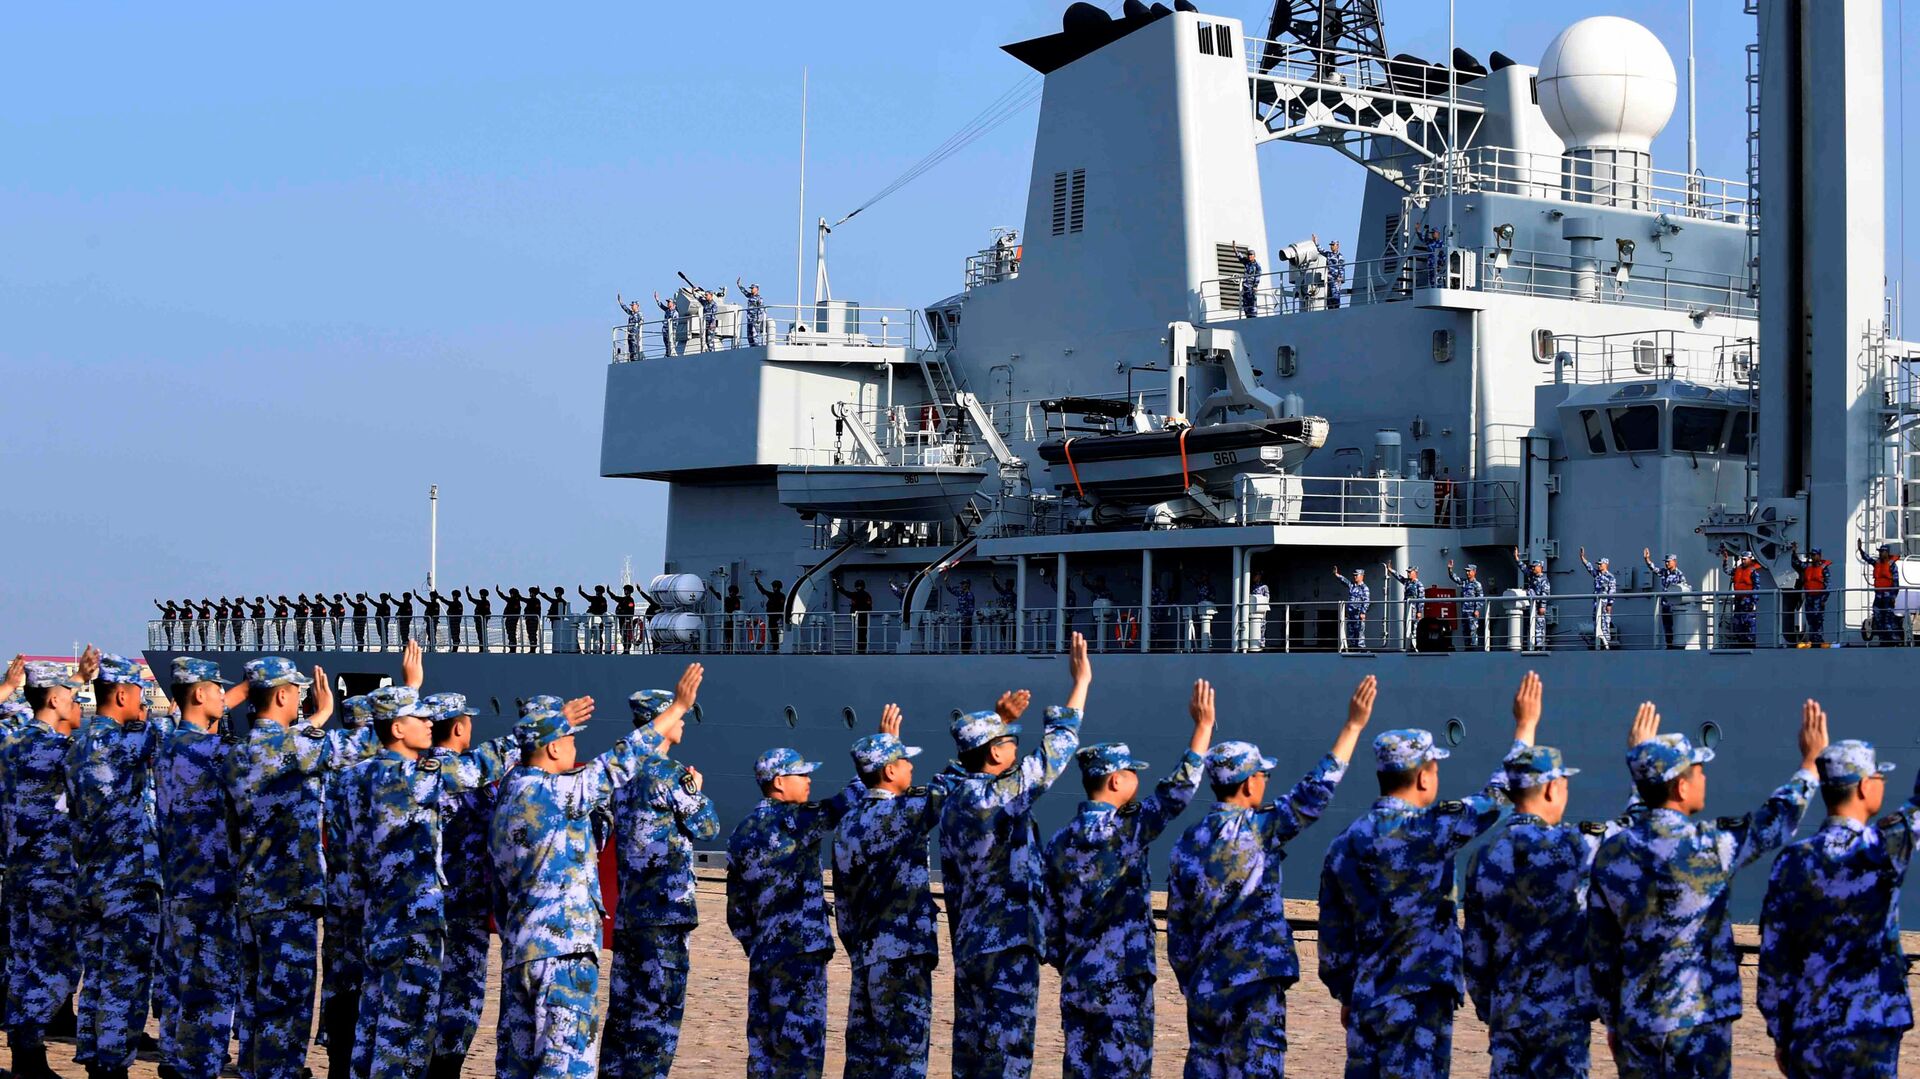 Soldiers of the Chinese People's Liberation Army (PLA) Navy take part in a ceremony as a replenishment ship sets sail to the Gulf of Aden and the waters off Somalia, from a naval port in Qingdao, Shandong province, China September 3, 2020 - Sputnik International, 1920, 22.02.2022